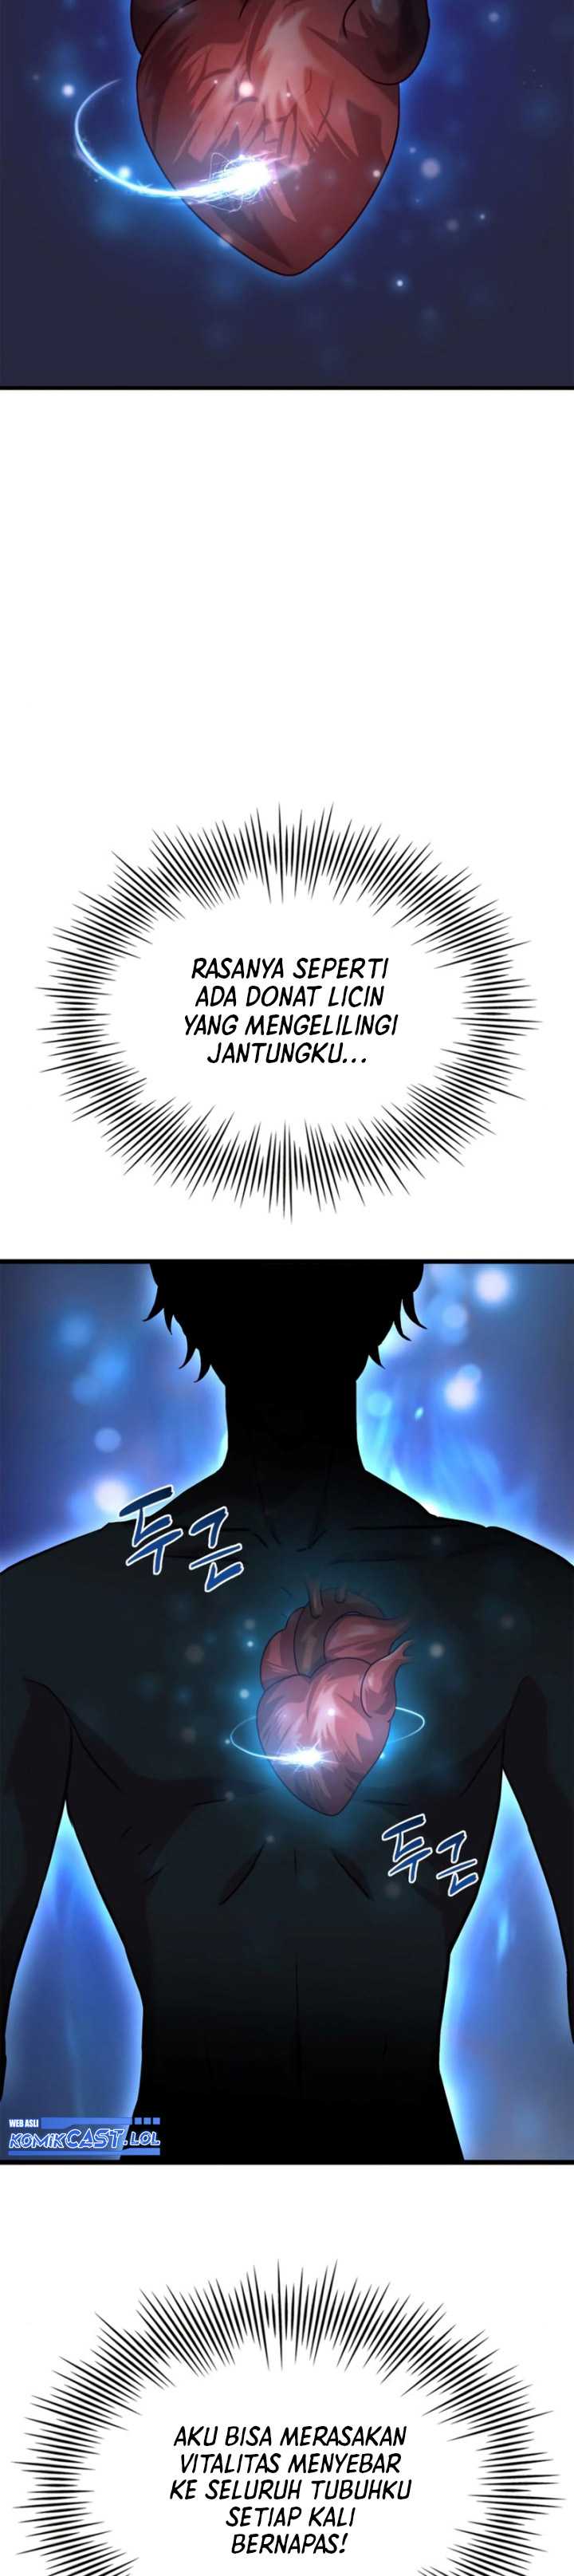 The Crown Prince That Sells Medicine Chapter 03